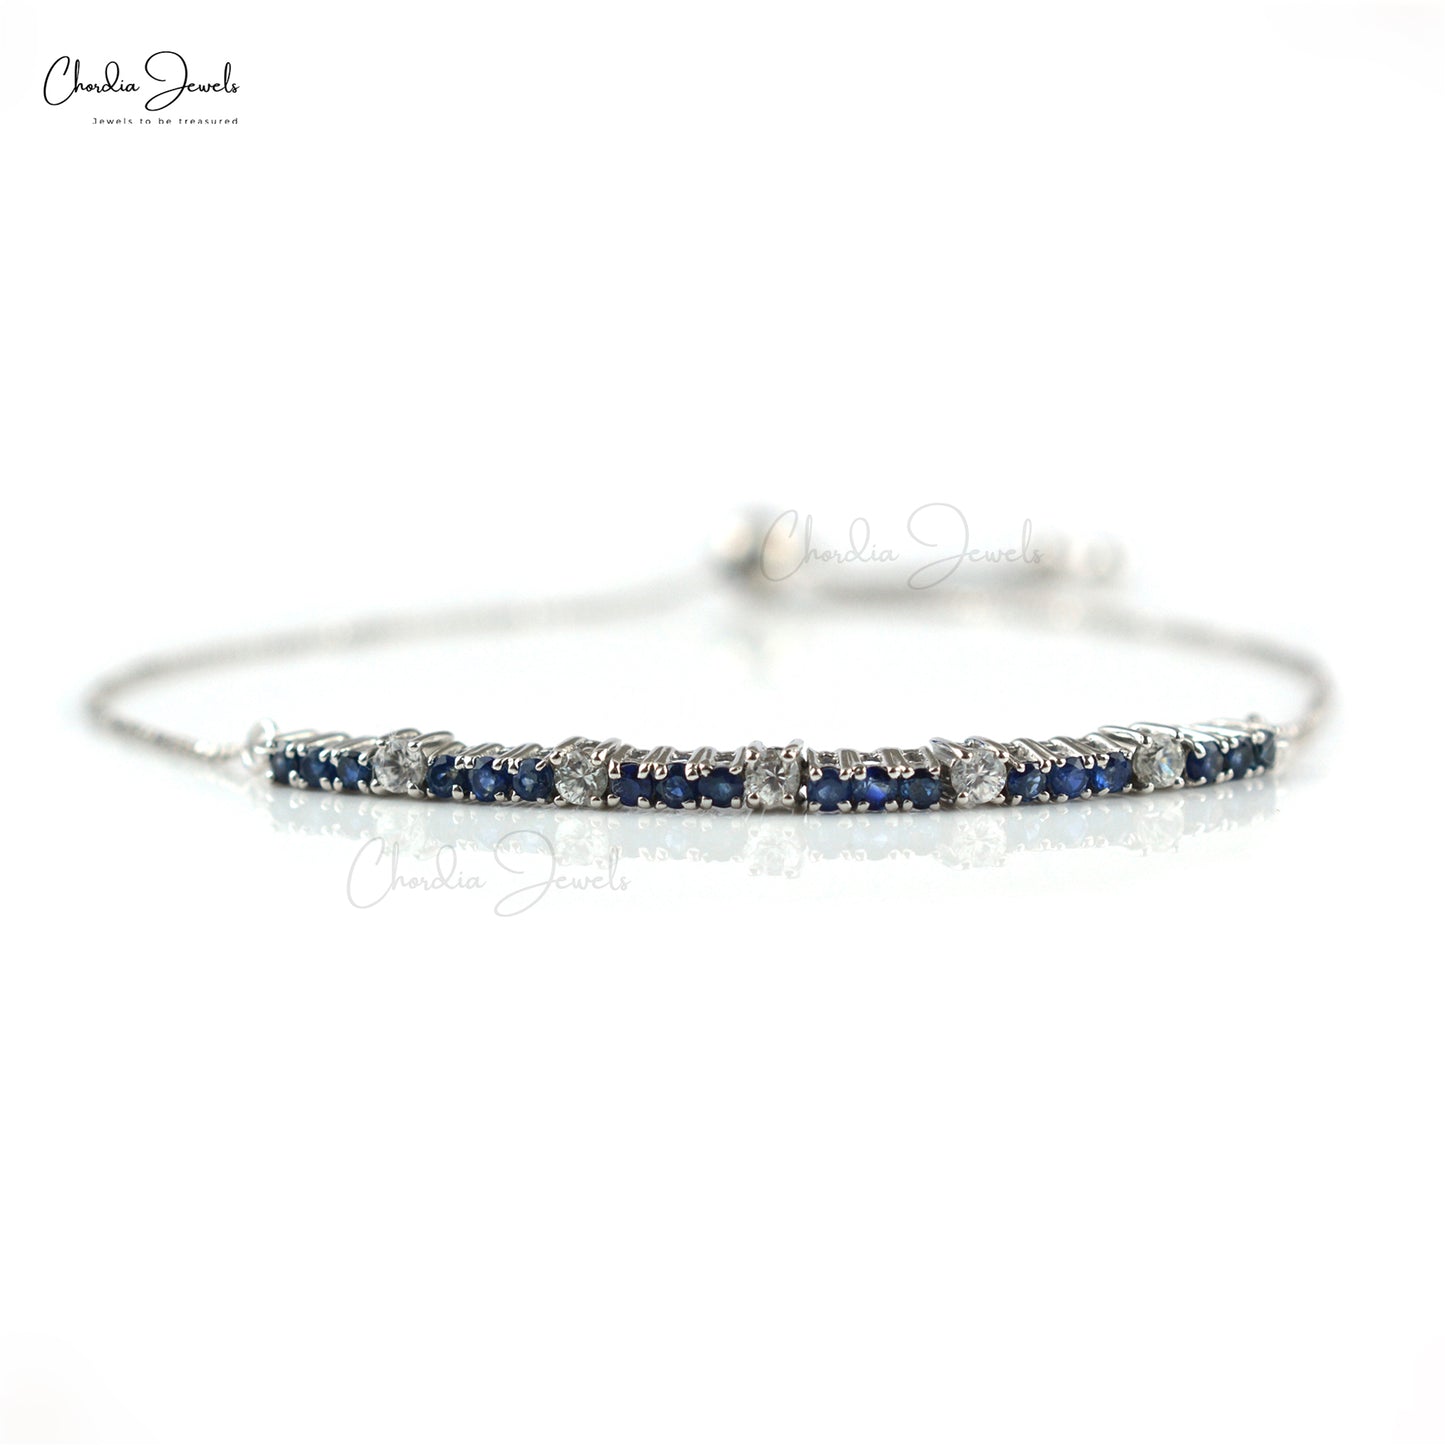 925 Sterling Silver Jewelry Bracelet Authentic Blue Sapphire Tennis High Quality Jewelry At Offer Price Round Cut White Zircon Fashion Jewelry